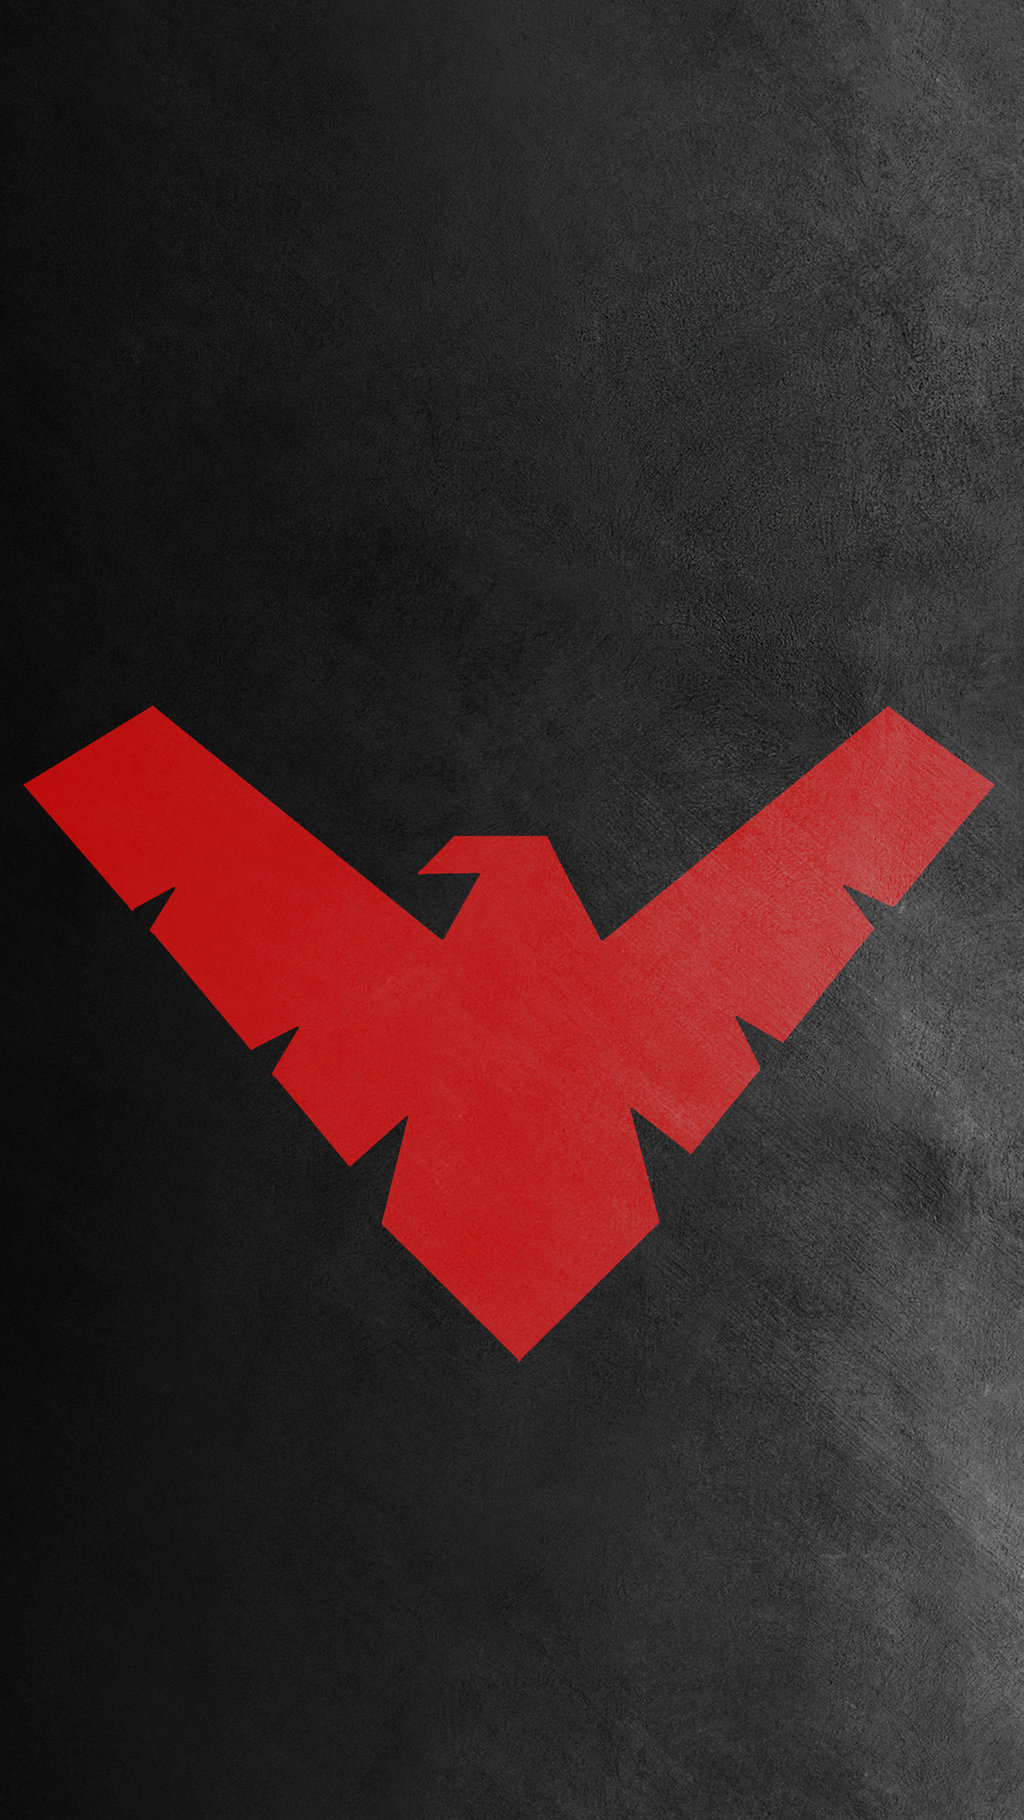 Nightwing Wallpaper Iphone Nightwing Iphone Wallpaper - Nightwing Logo Wallpaper Iphone , HD Wallpaper & Backgrounds